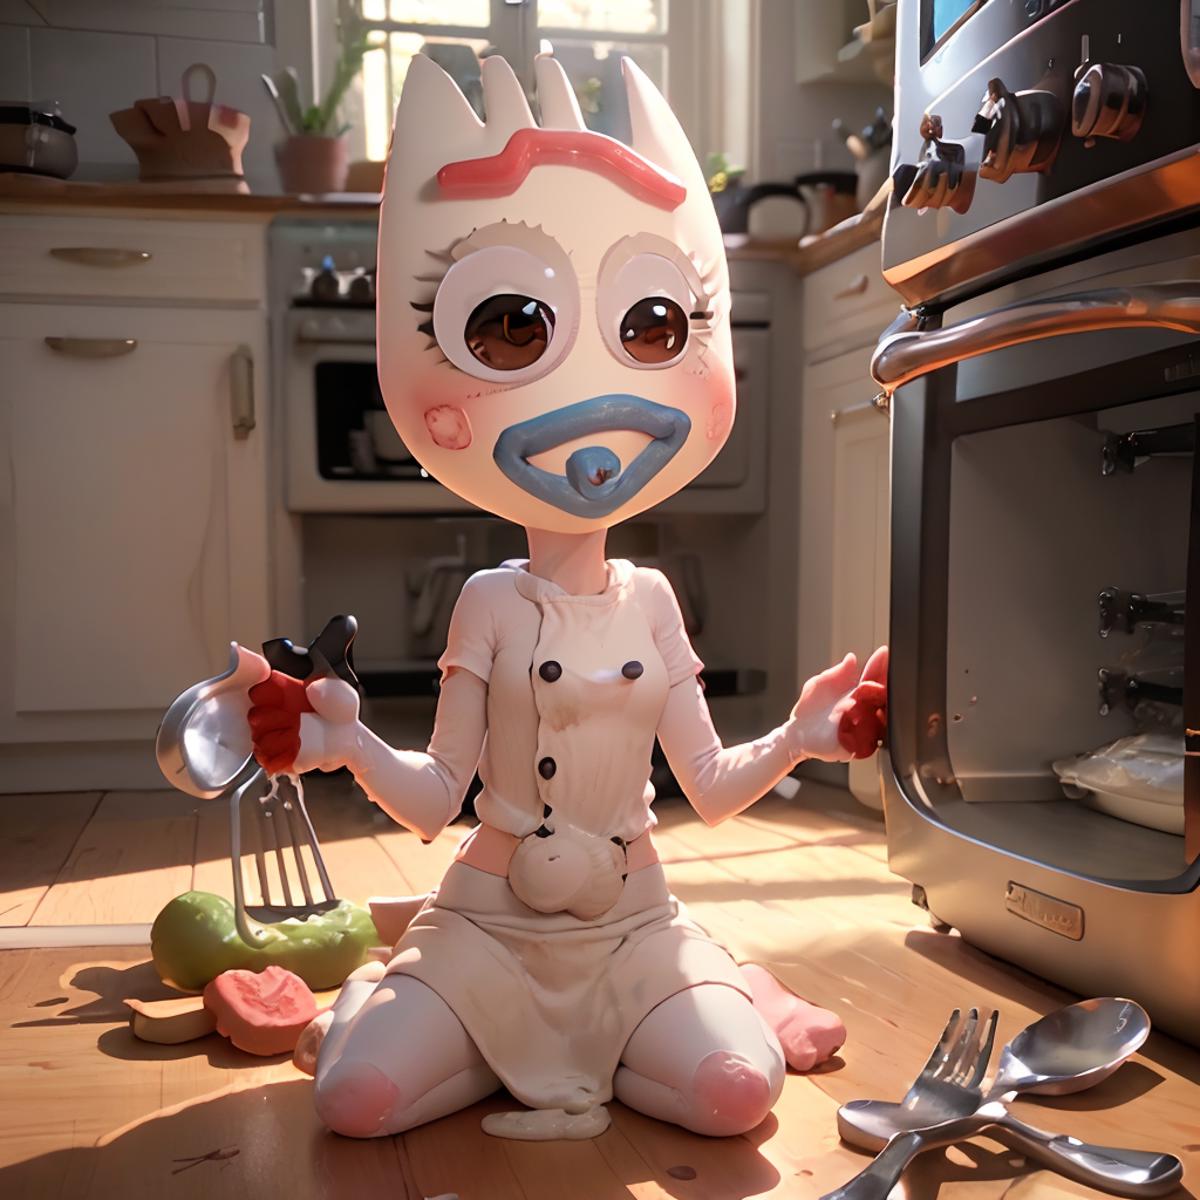 Forky image by 3VOLUTION